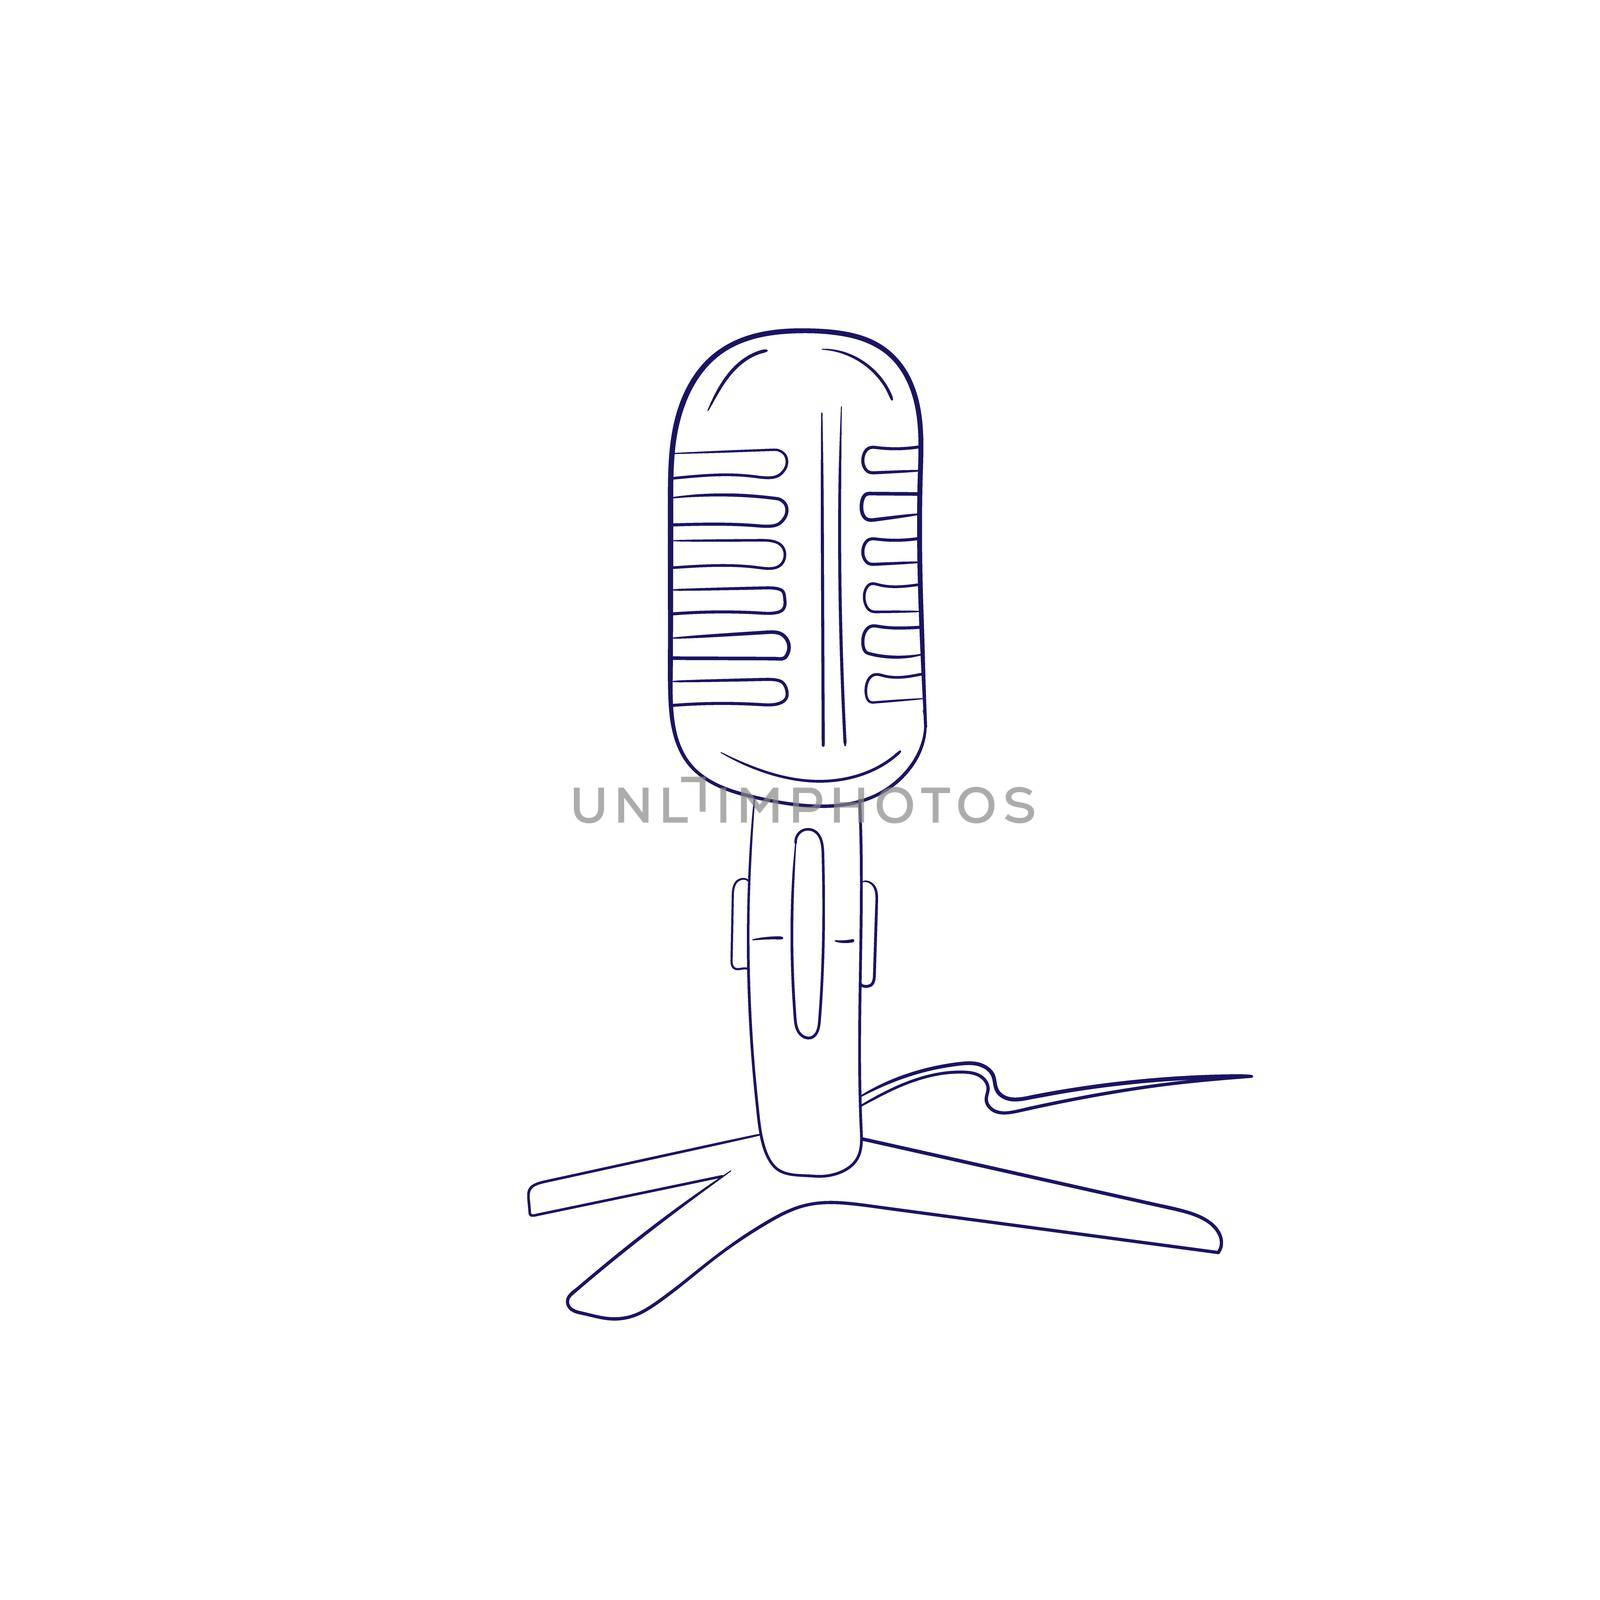 Podcast. Retro microphone isolated on white background. Design element for emblem, sign. Vector illustration. Hand drawn icon for coloring book